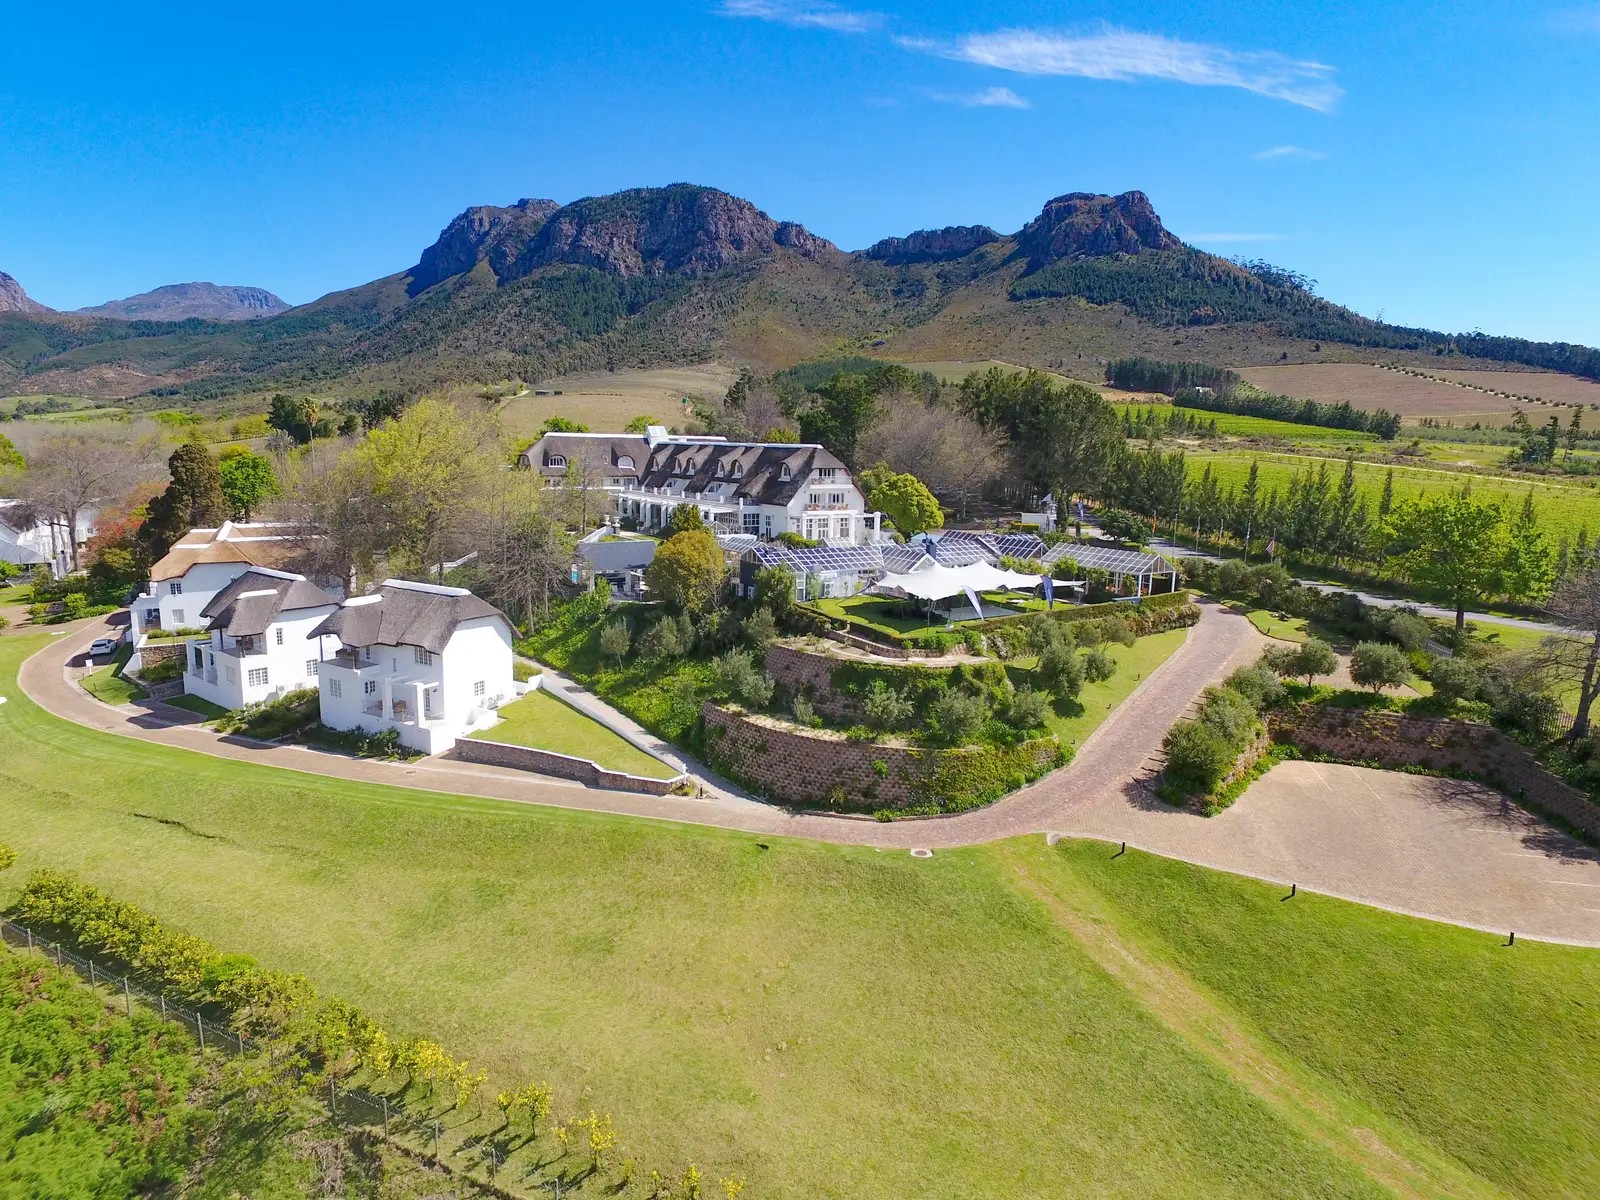 Le Franschhoek Hotel and Spa